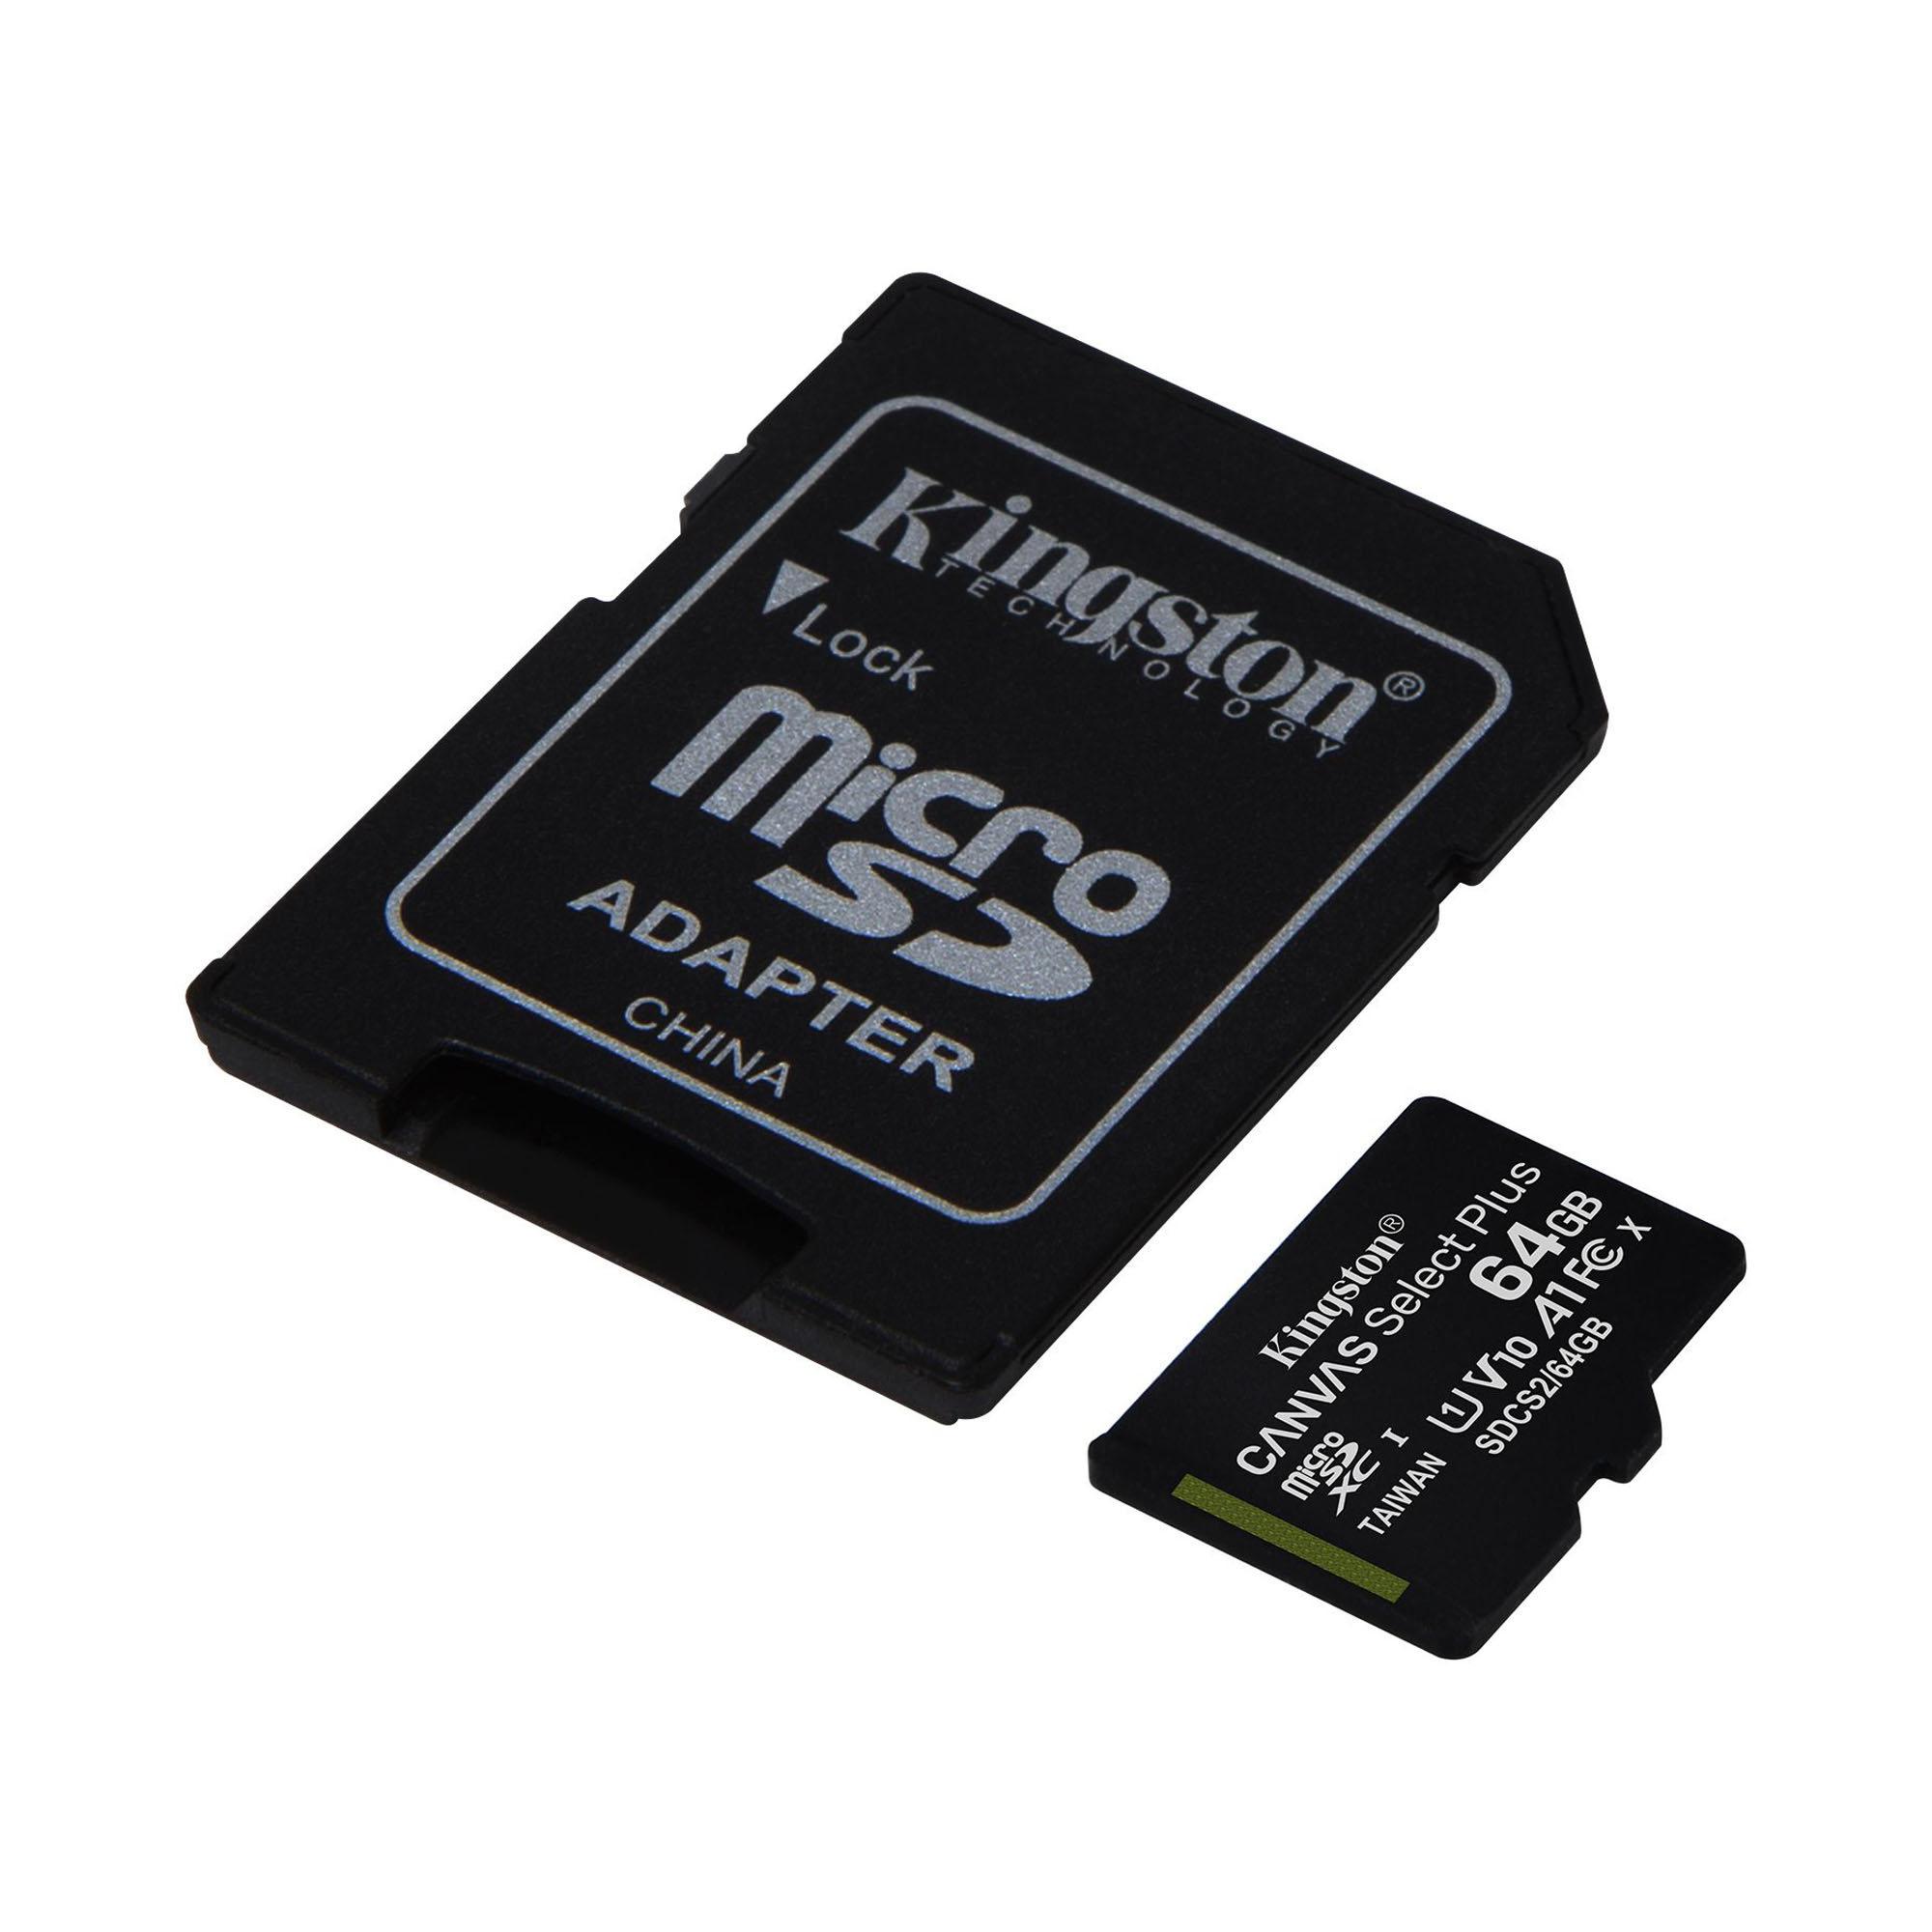 Memory Card Kingston SD Micro 64GB Class 10 UHS-I Canvas Plus plus SD adapter